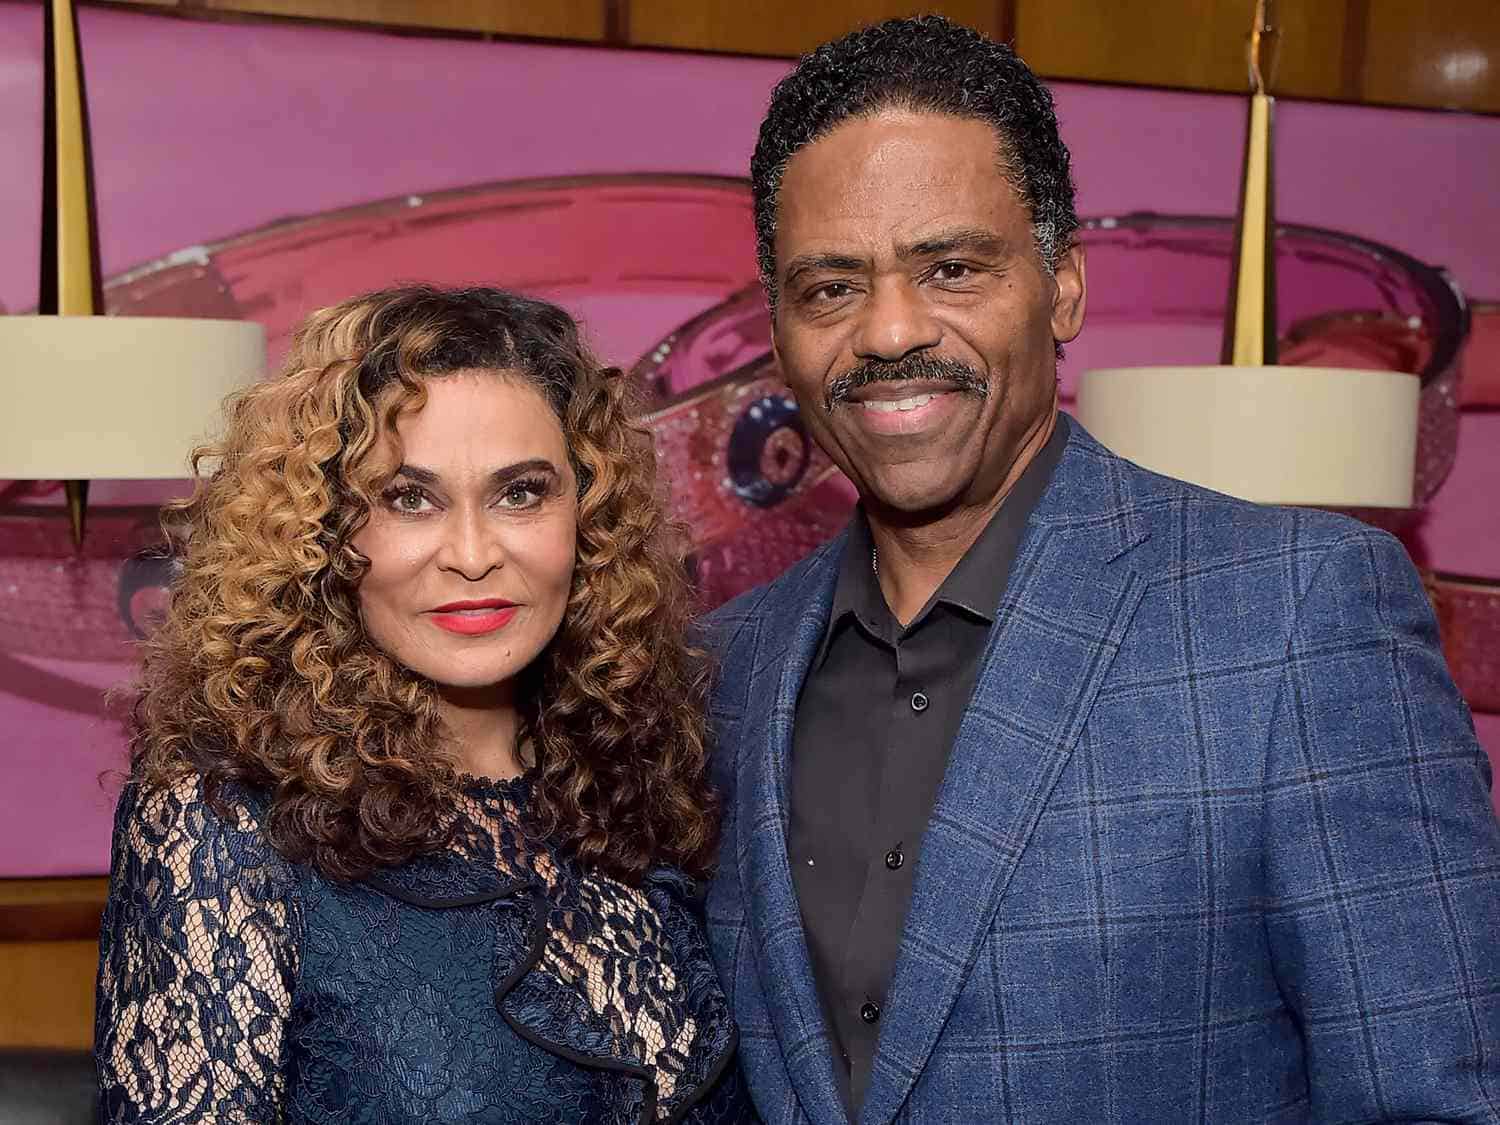 Actor Richard Lawson with soon-to-be ex-wife, Tina Knowles (Credits: People)